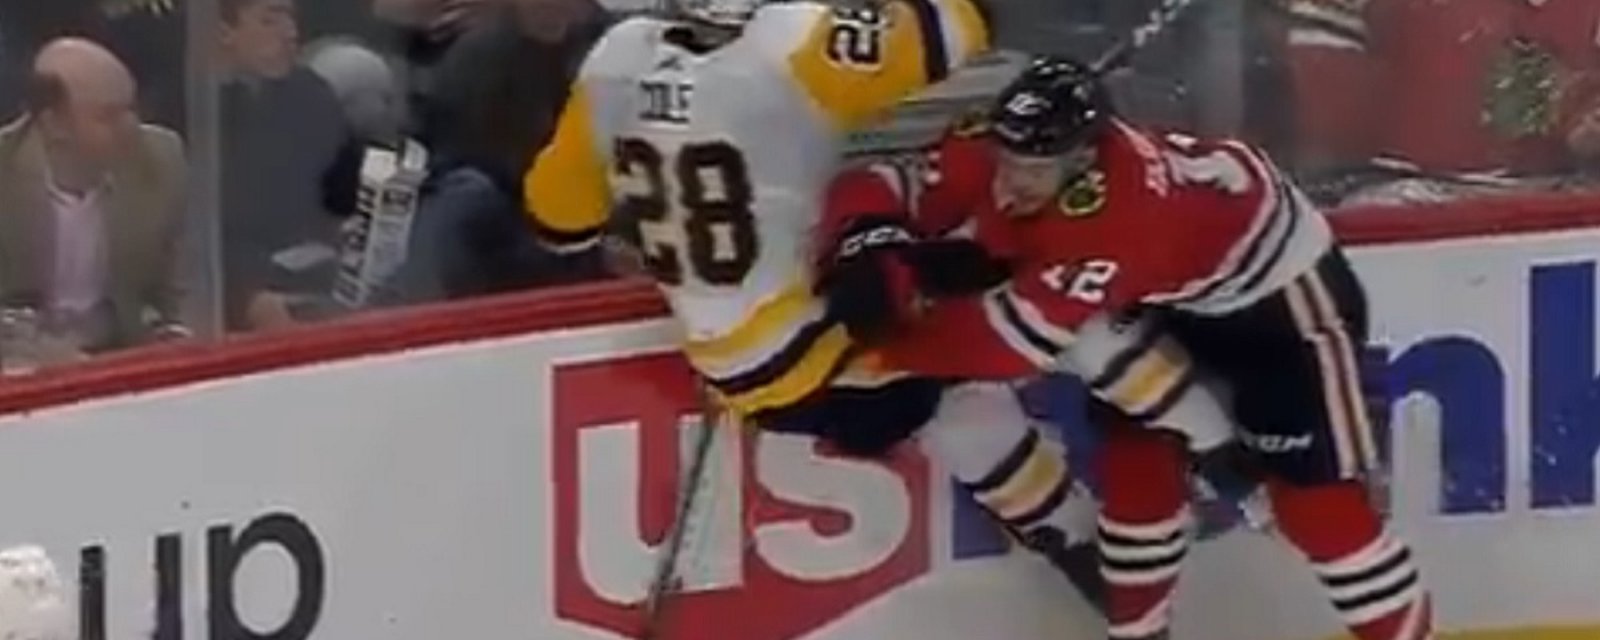 5'7 rookie crushes a much larger man with a huge hit!